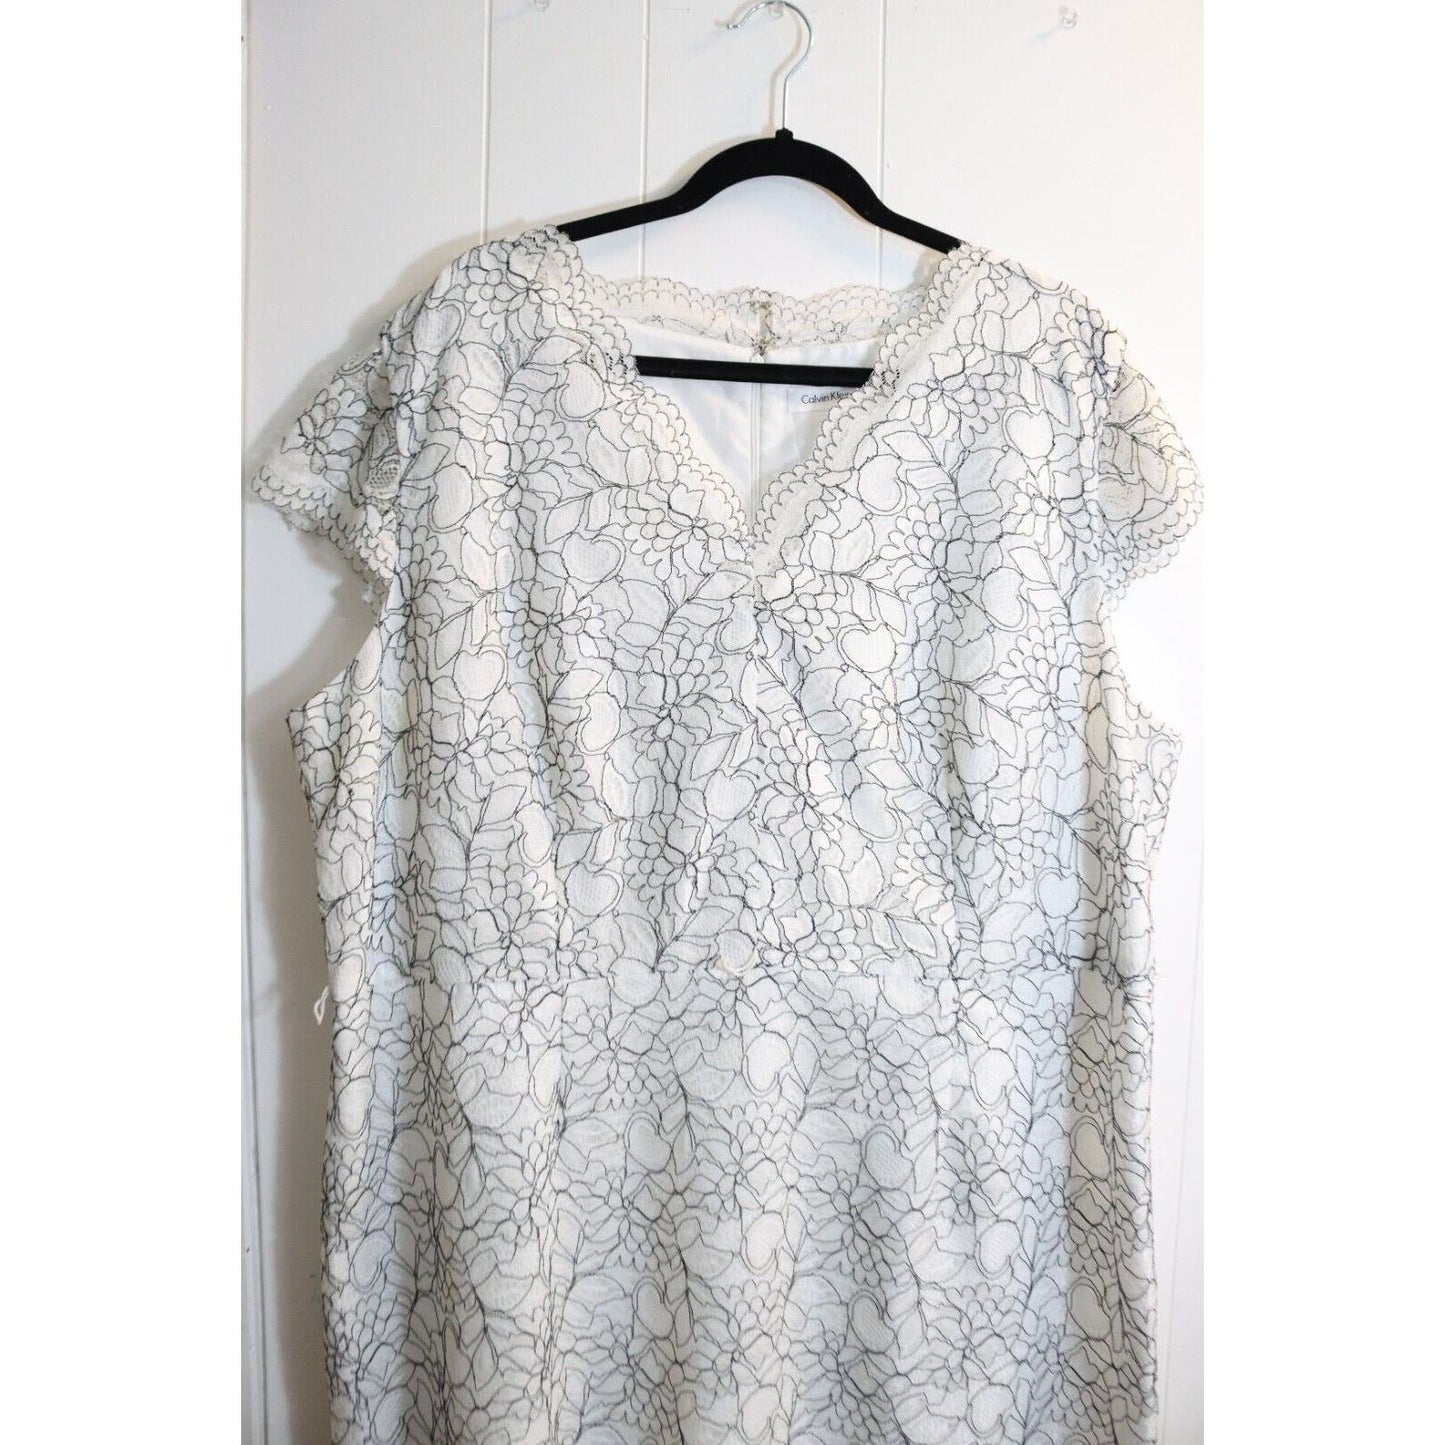 Calvin Klein White with Black Lace overlay Dress Size 22